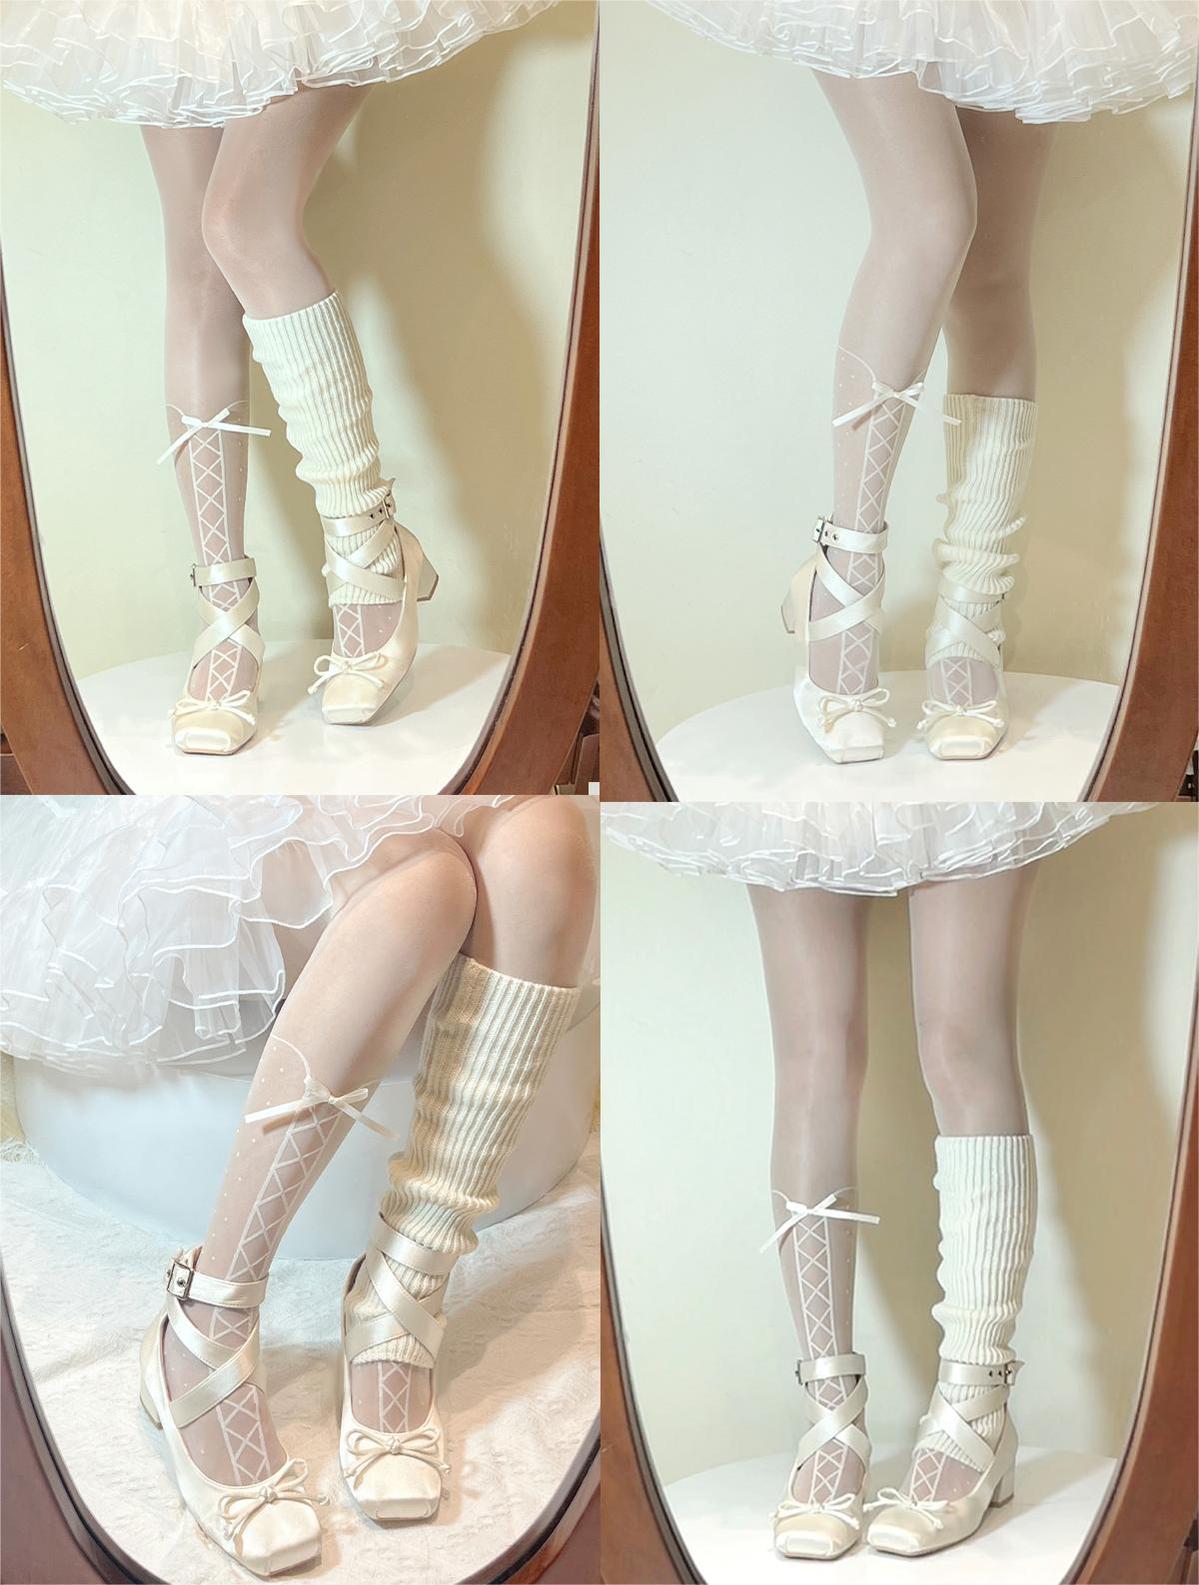 Lolita Shoes Ballet Style Square Toe Bow Heels Shoes 35592:543900